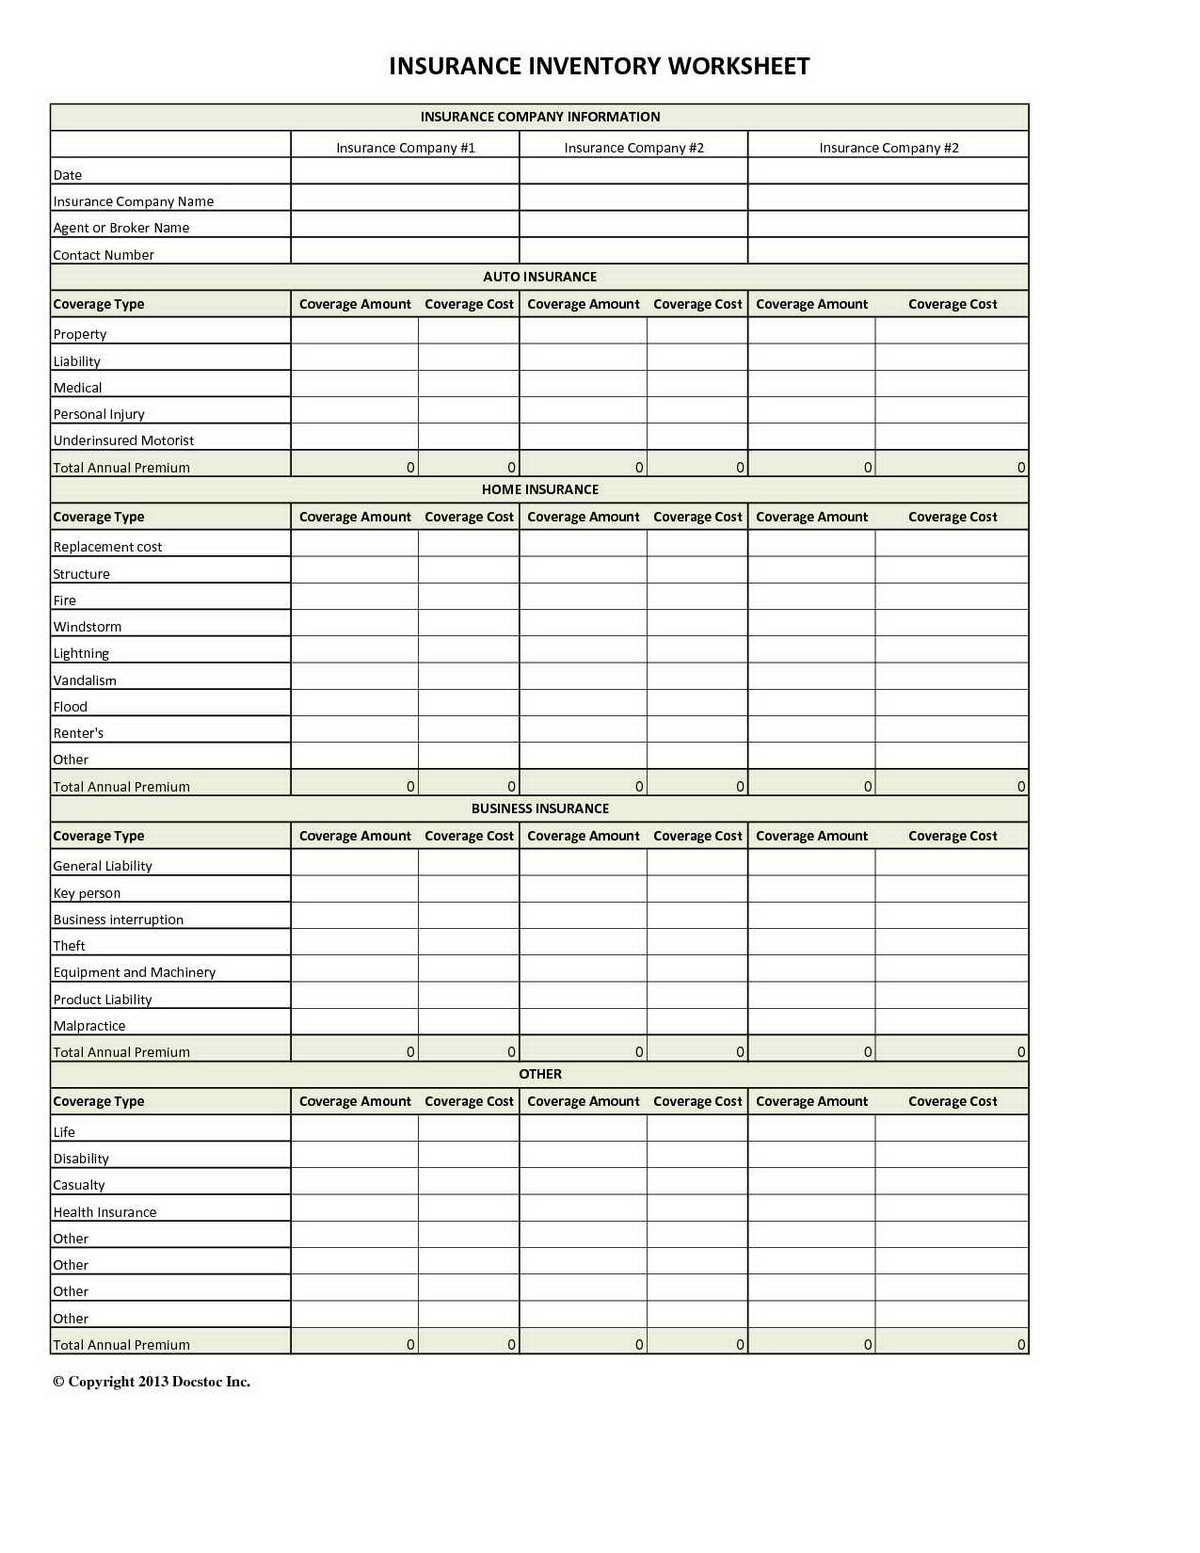 Business Valuation Spreadsheet Excel With Regard To Business Valuation Spreadsheet With Excel Sheet Template Images Home